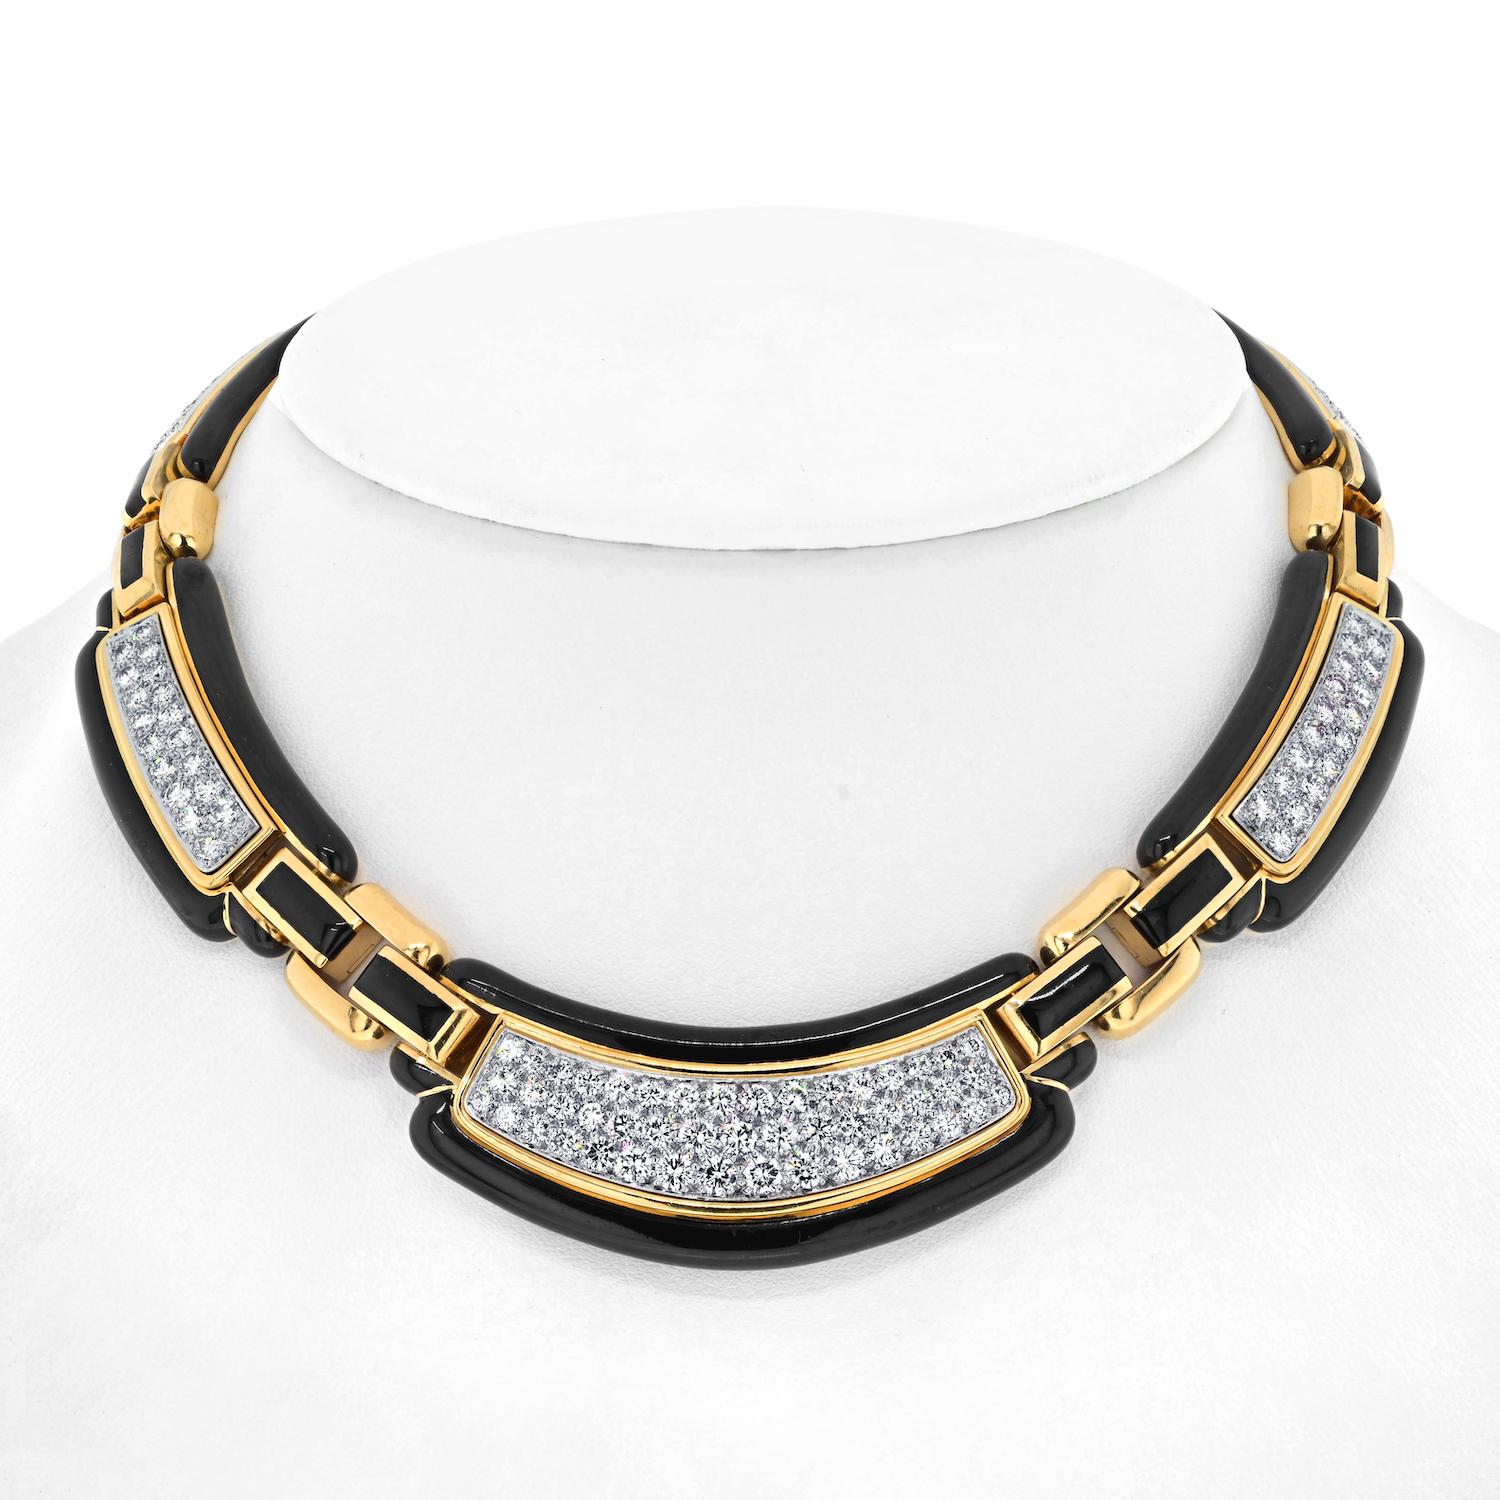 Prepare to be enchanted by the mesmerizing beauty of this David Webb Platinum & 18K Yellow Gold Black Enamel Diamond Collar Necklace. This extraordinary piece exemplifies the unparalleled craftsmanship and artistry for which David Webb is